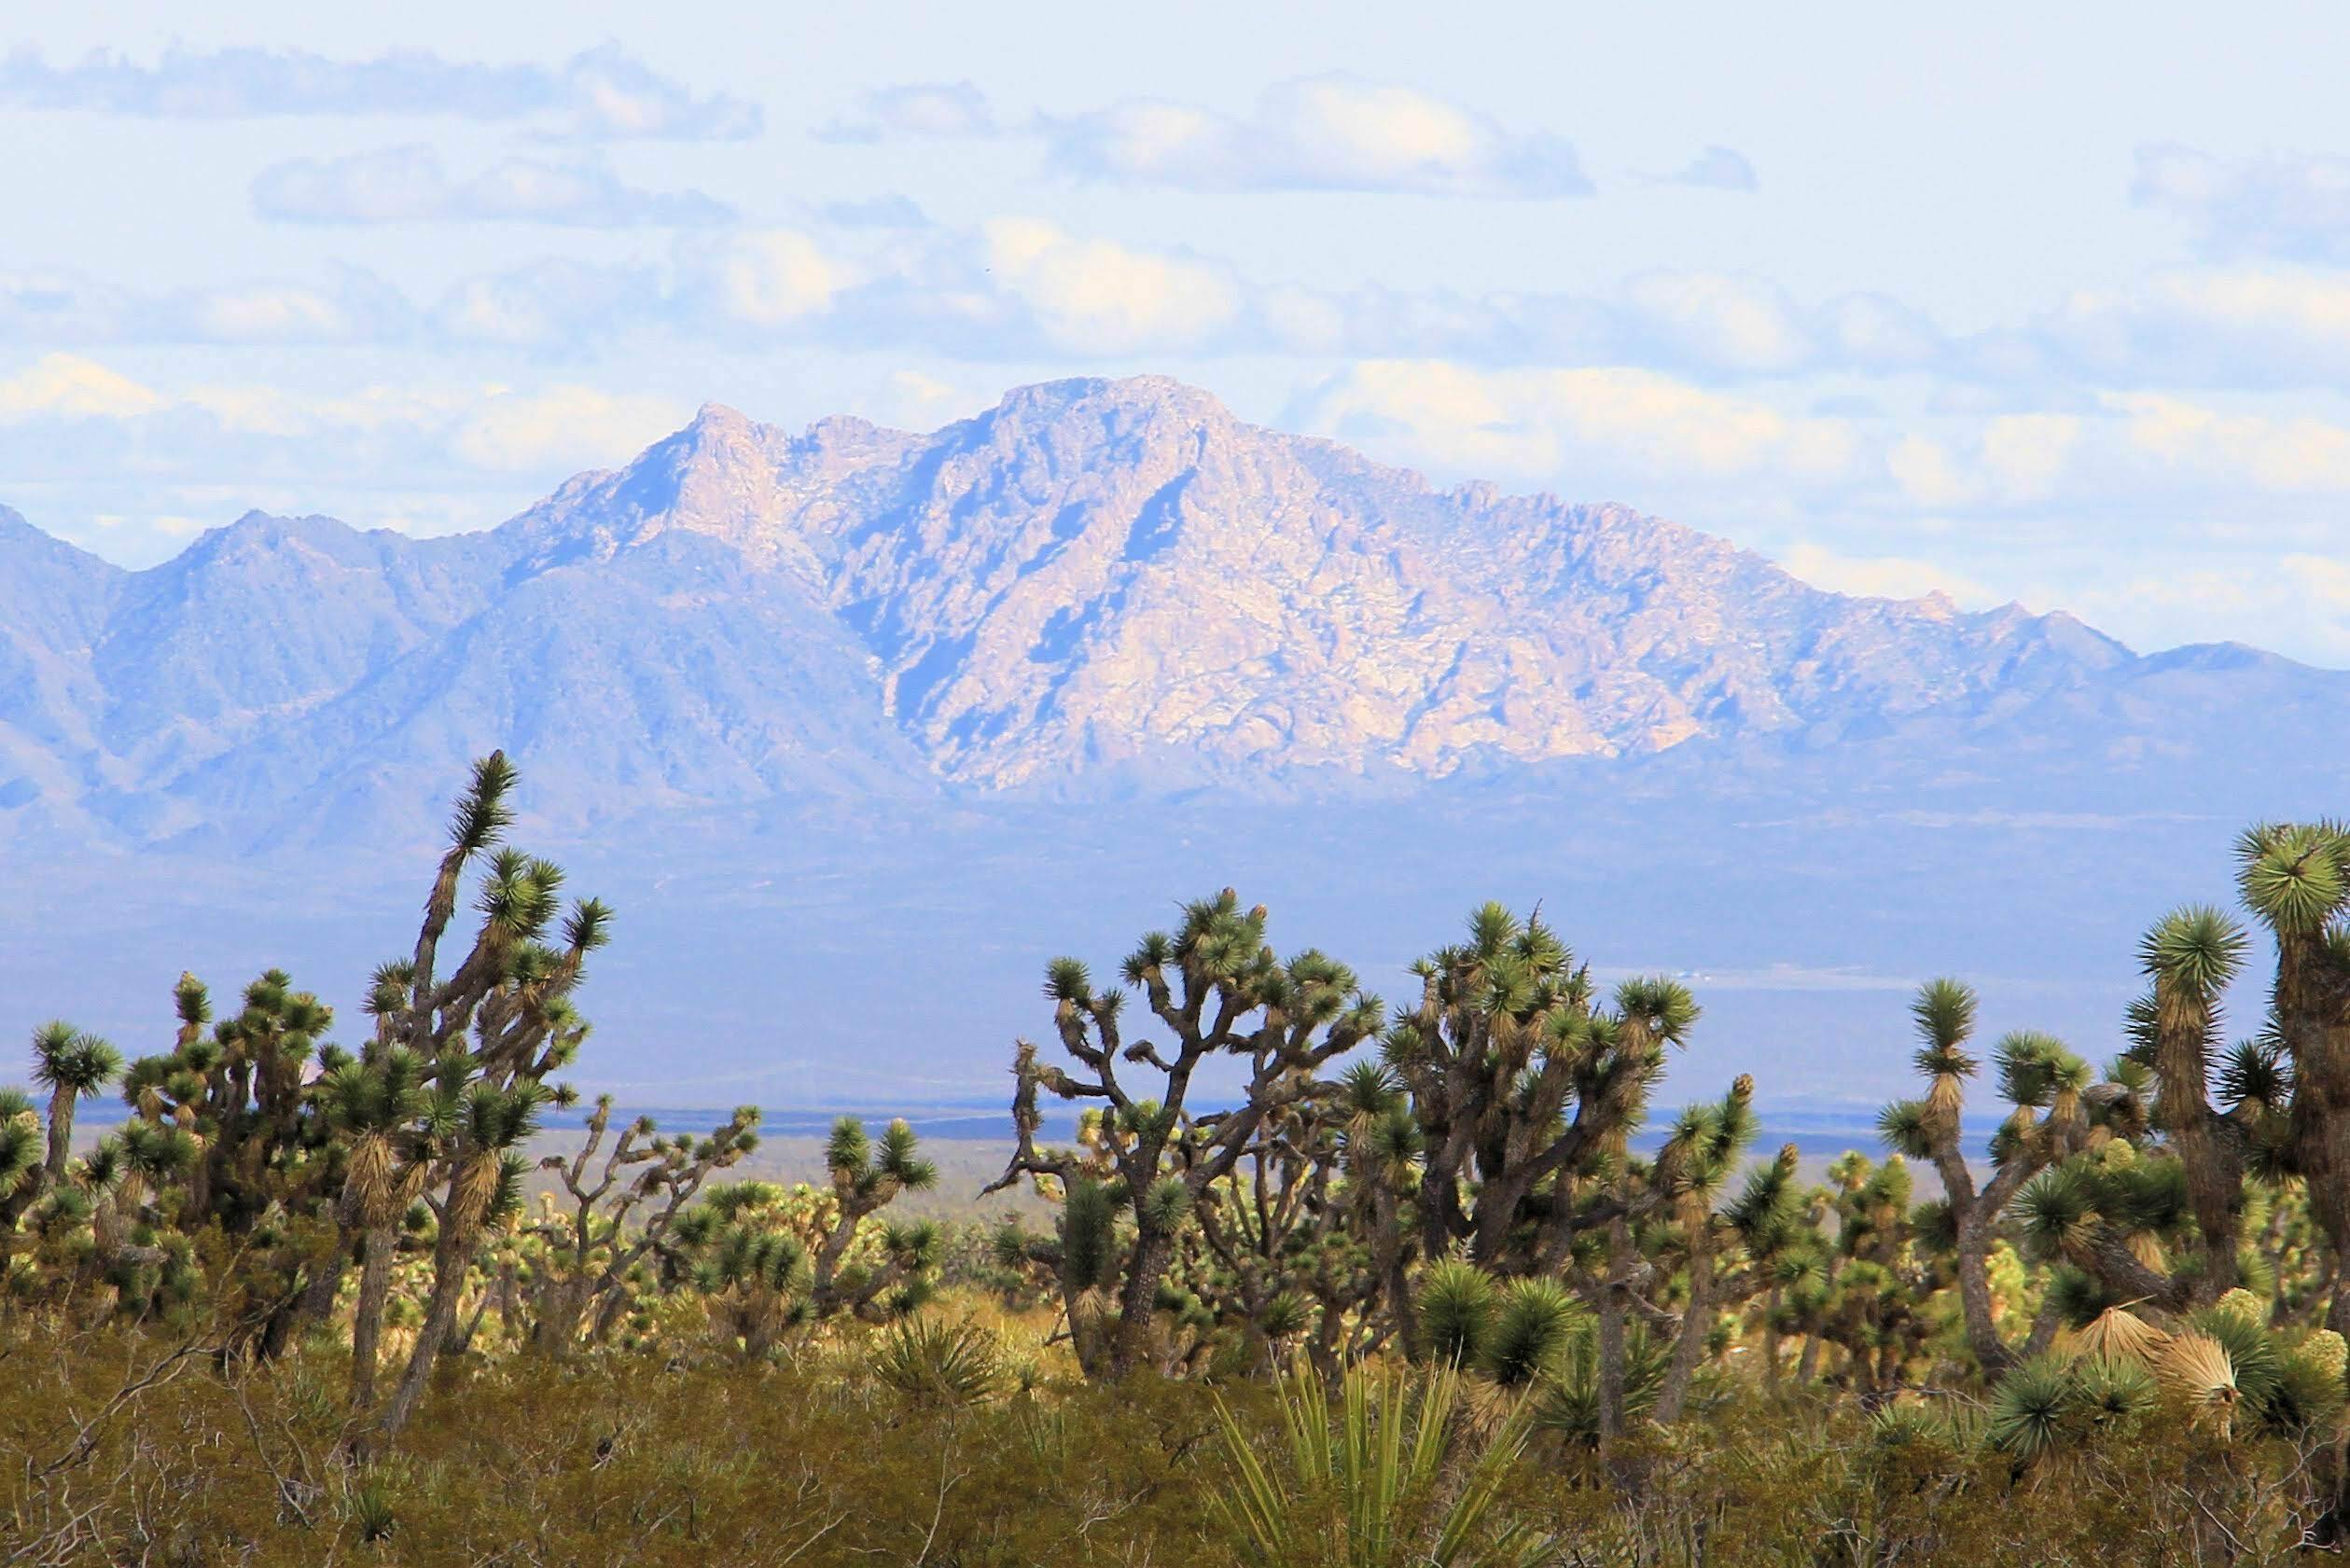 Photo of mountain with Joshua trees in the foreground